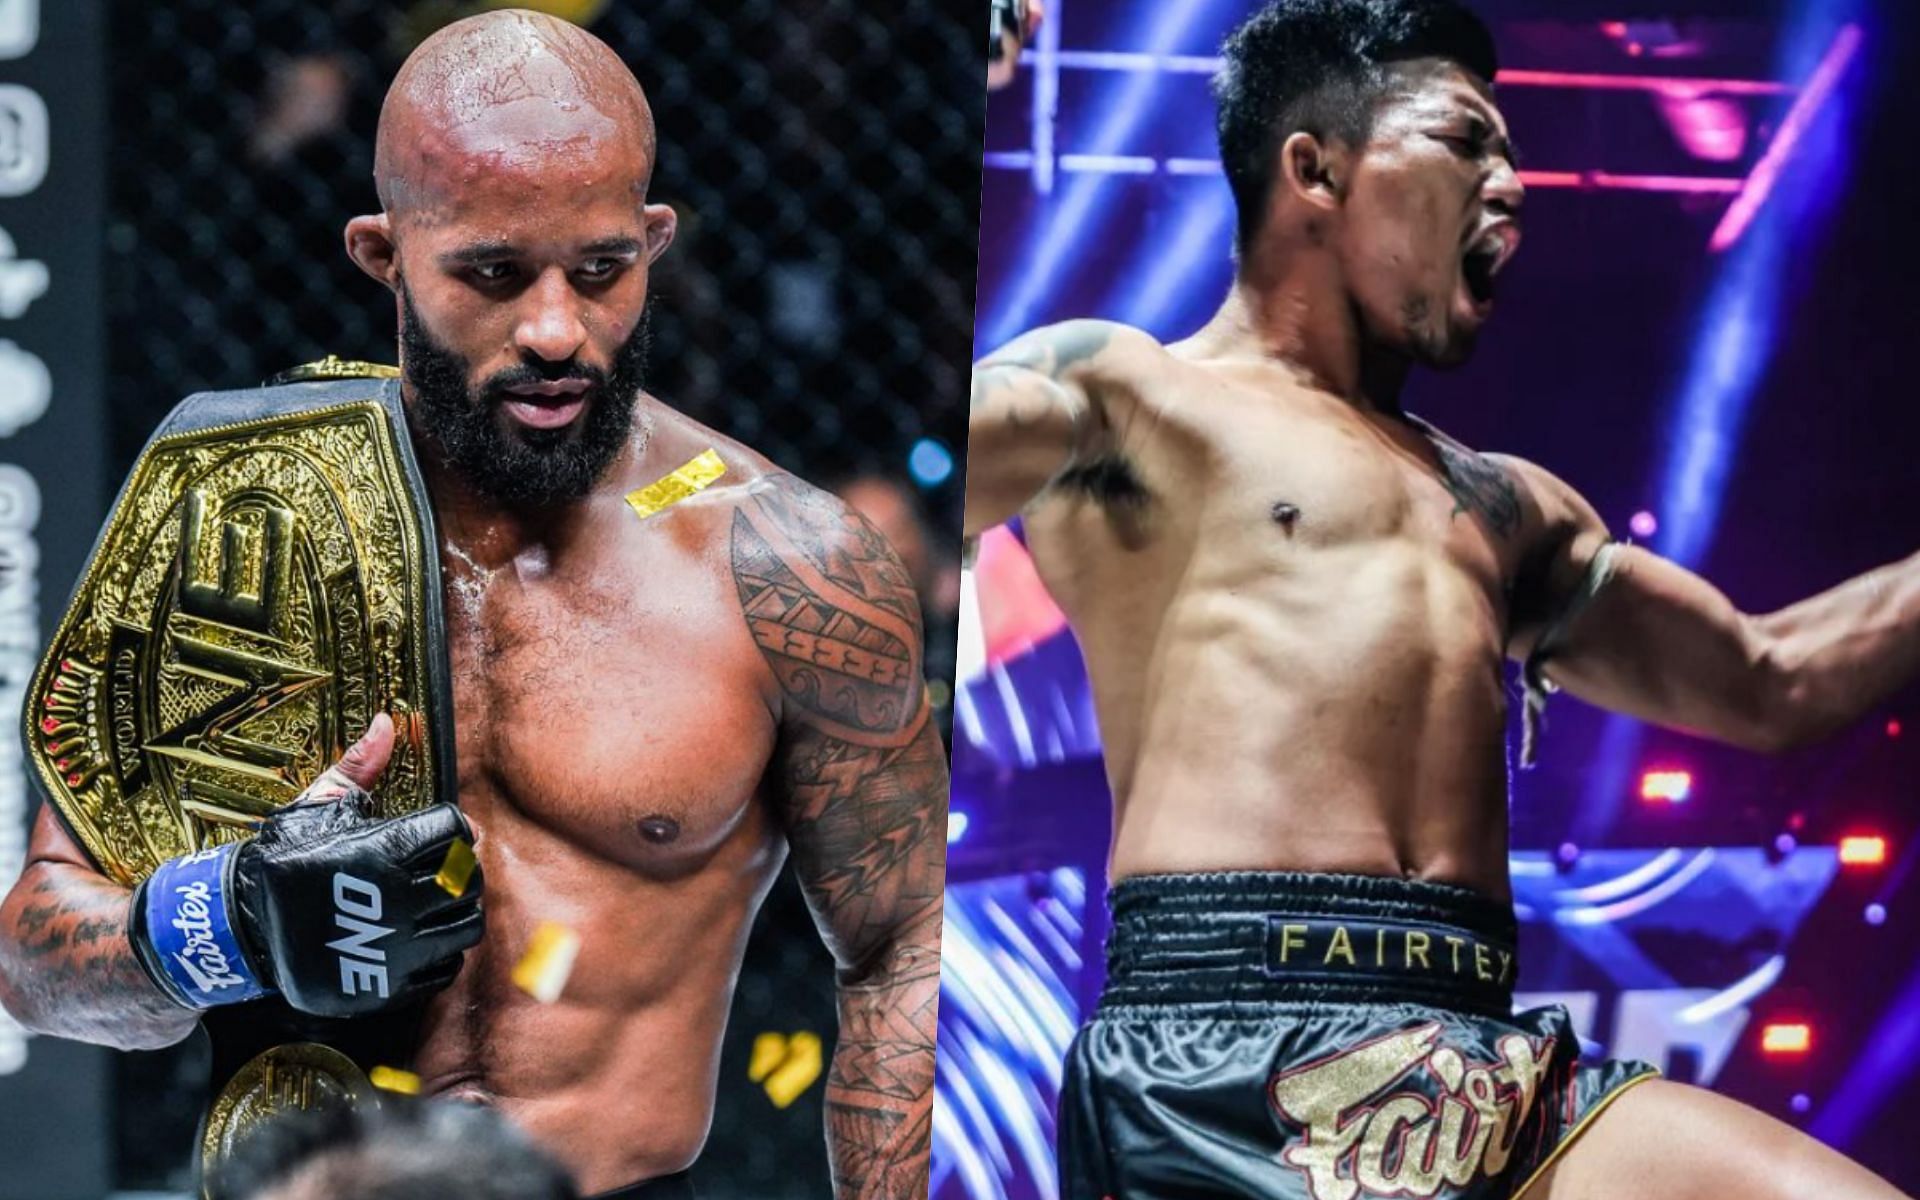 Demetrious Johnson (L) and Rodtang (R) | Photo credit: ONE Championship